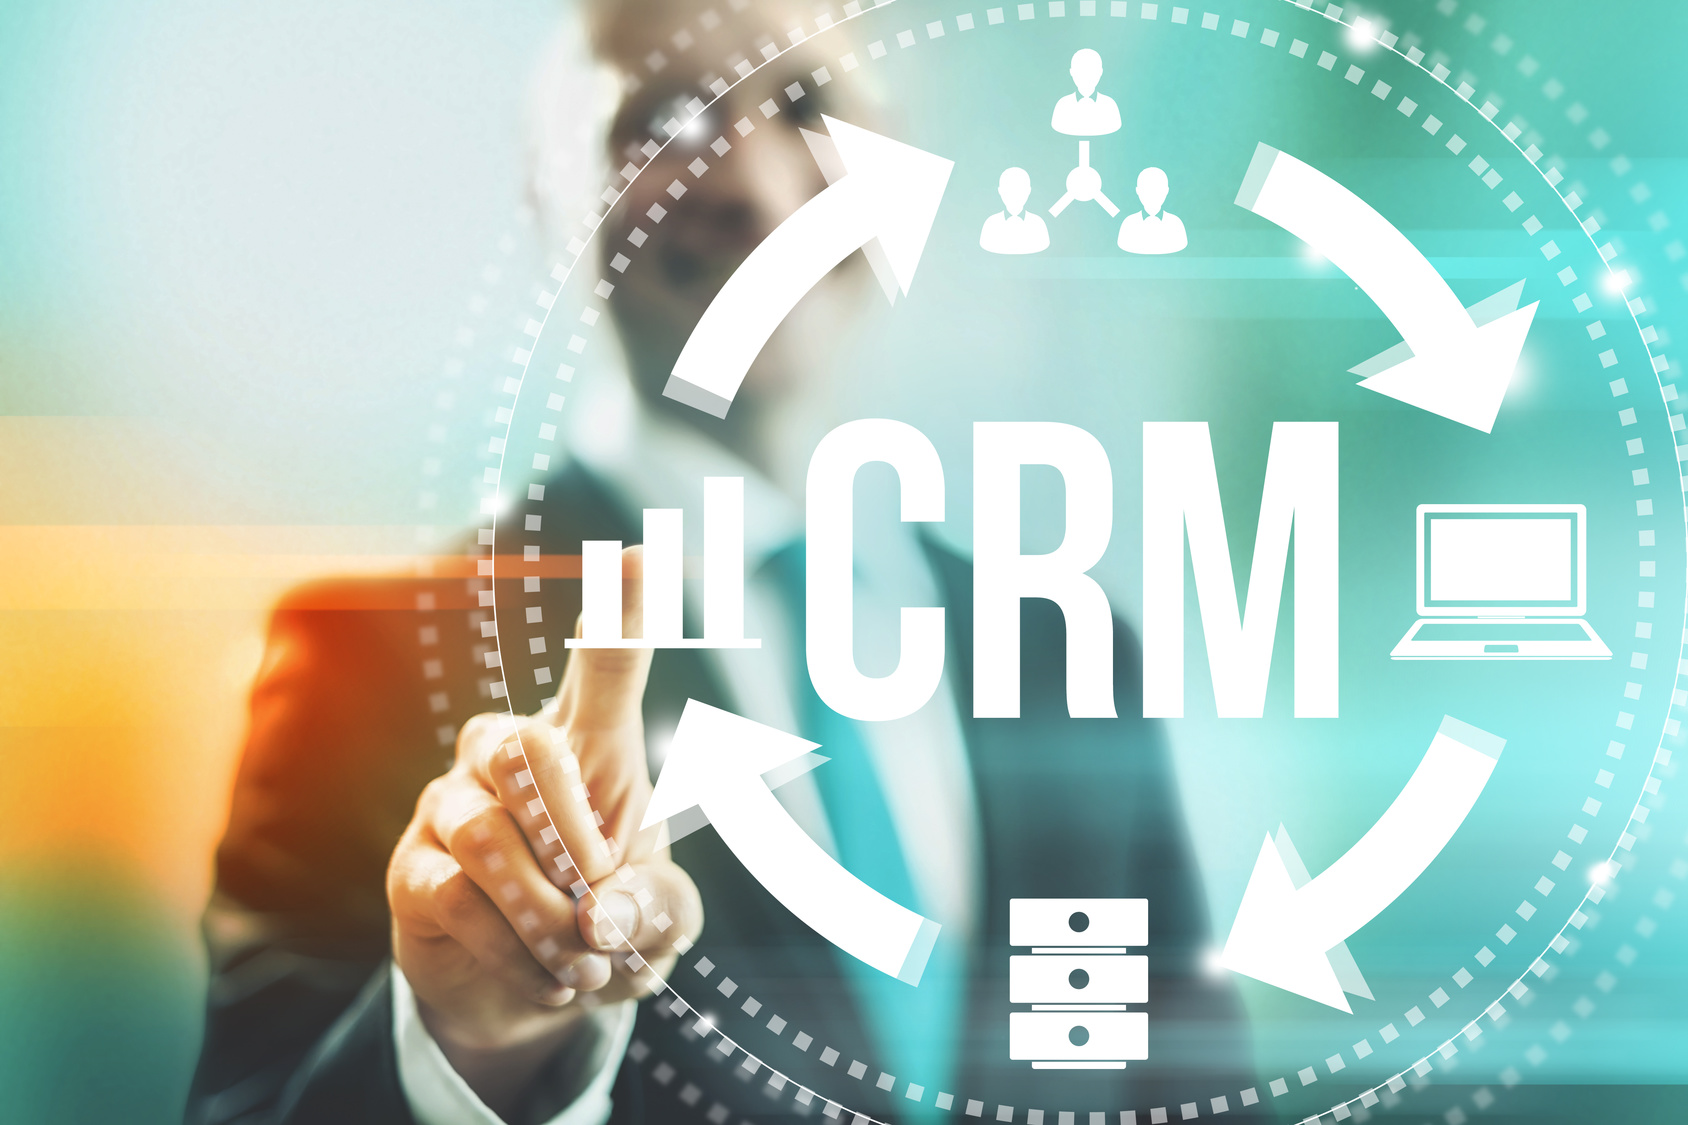 The importance of Customer Relationship Management (CRM) Systems in